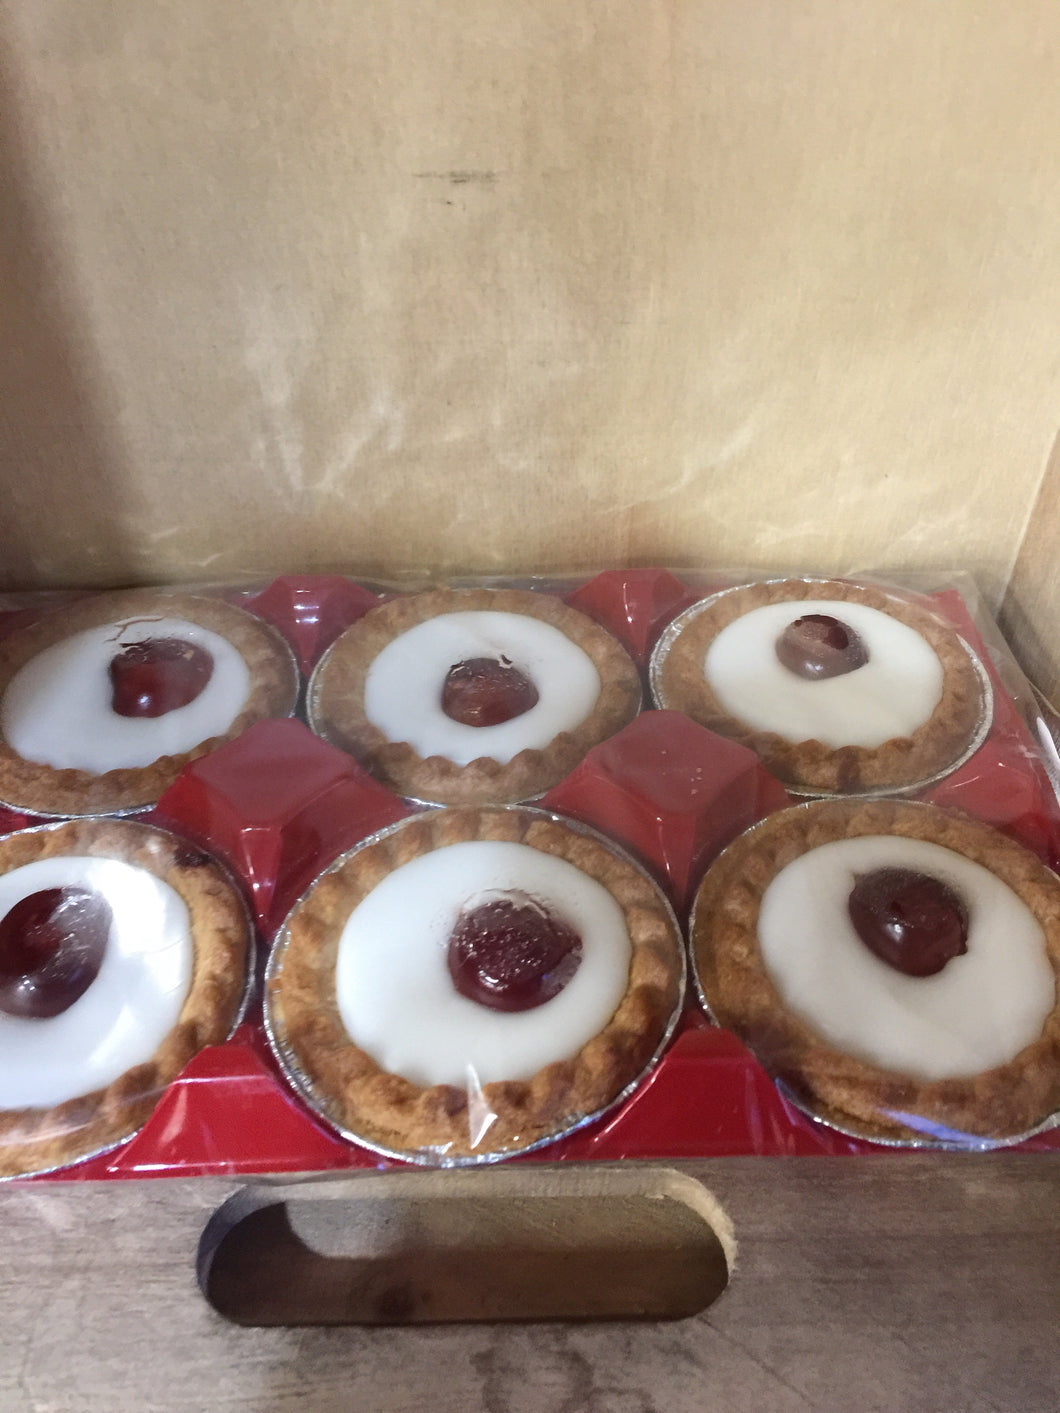 Low Price 6x Bakewell Tarts